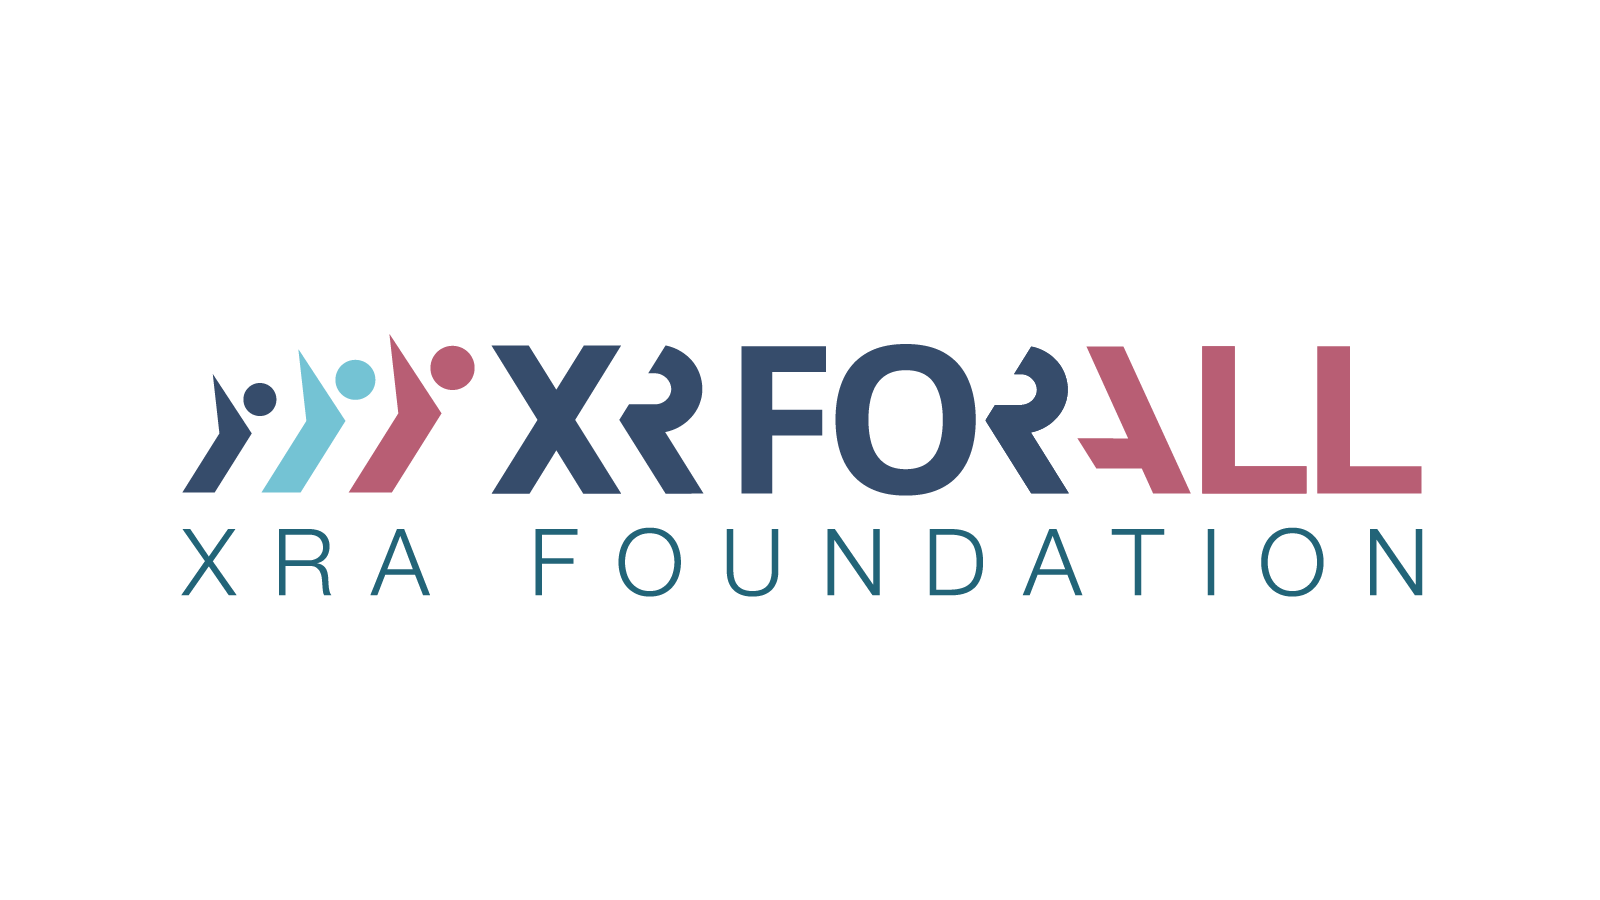 XR ASSOCIATION ANNOUNCES LAUNCH OF XR FOR ALL FOUNDATION